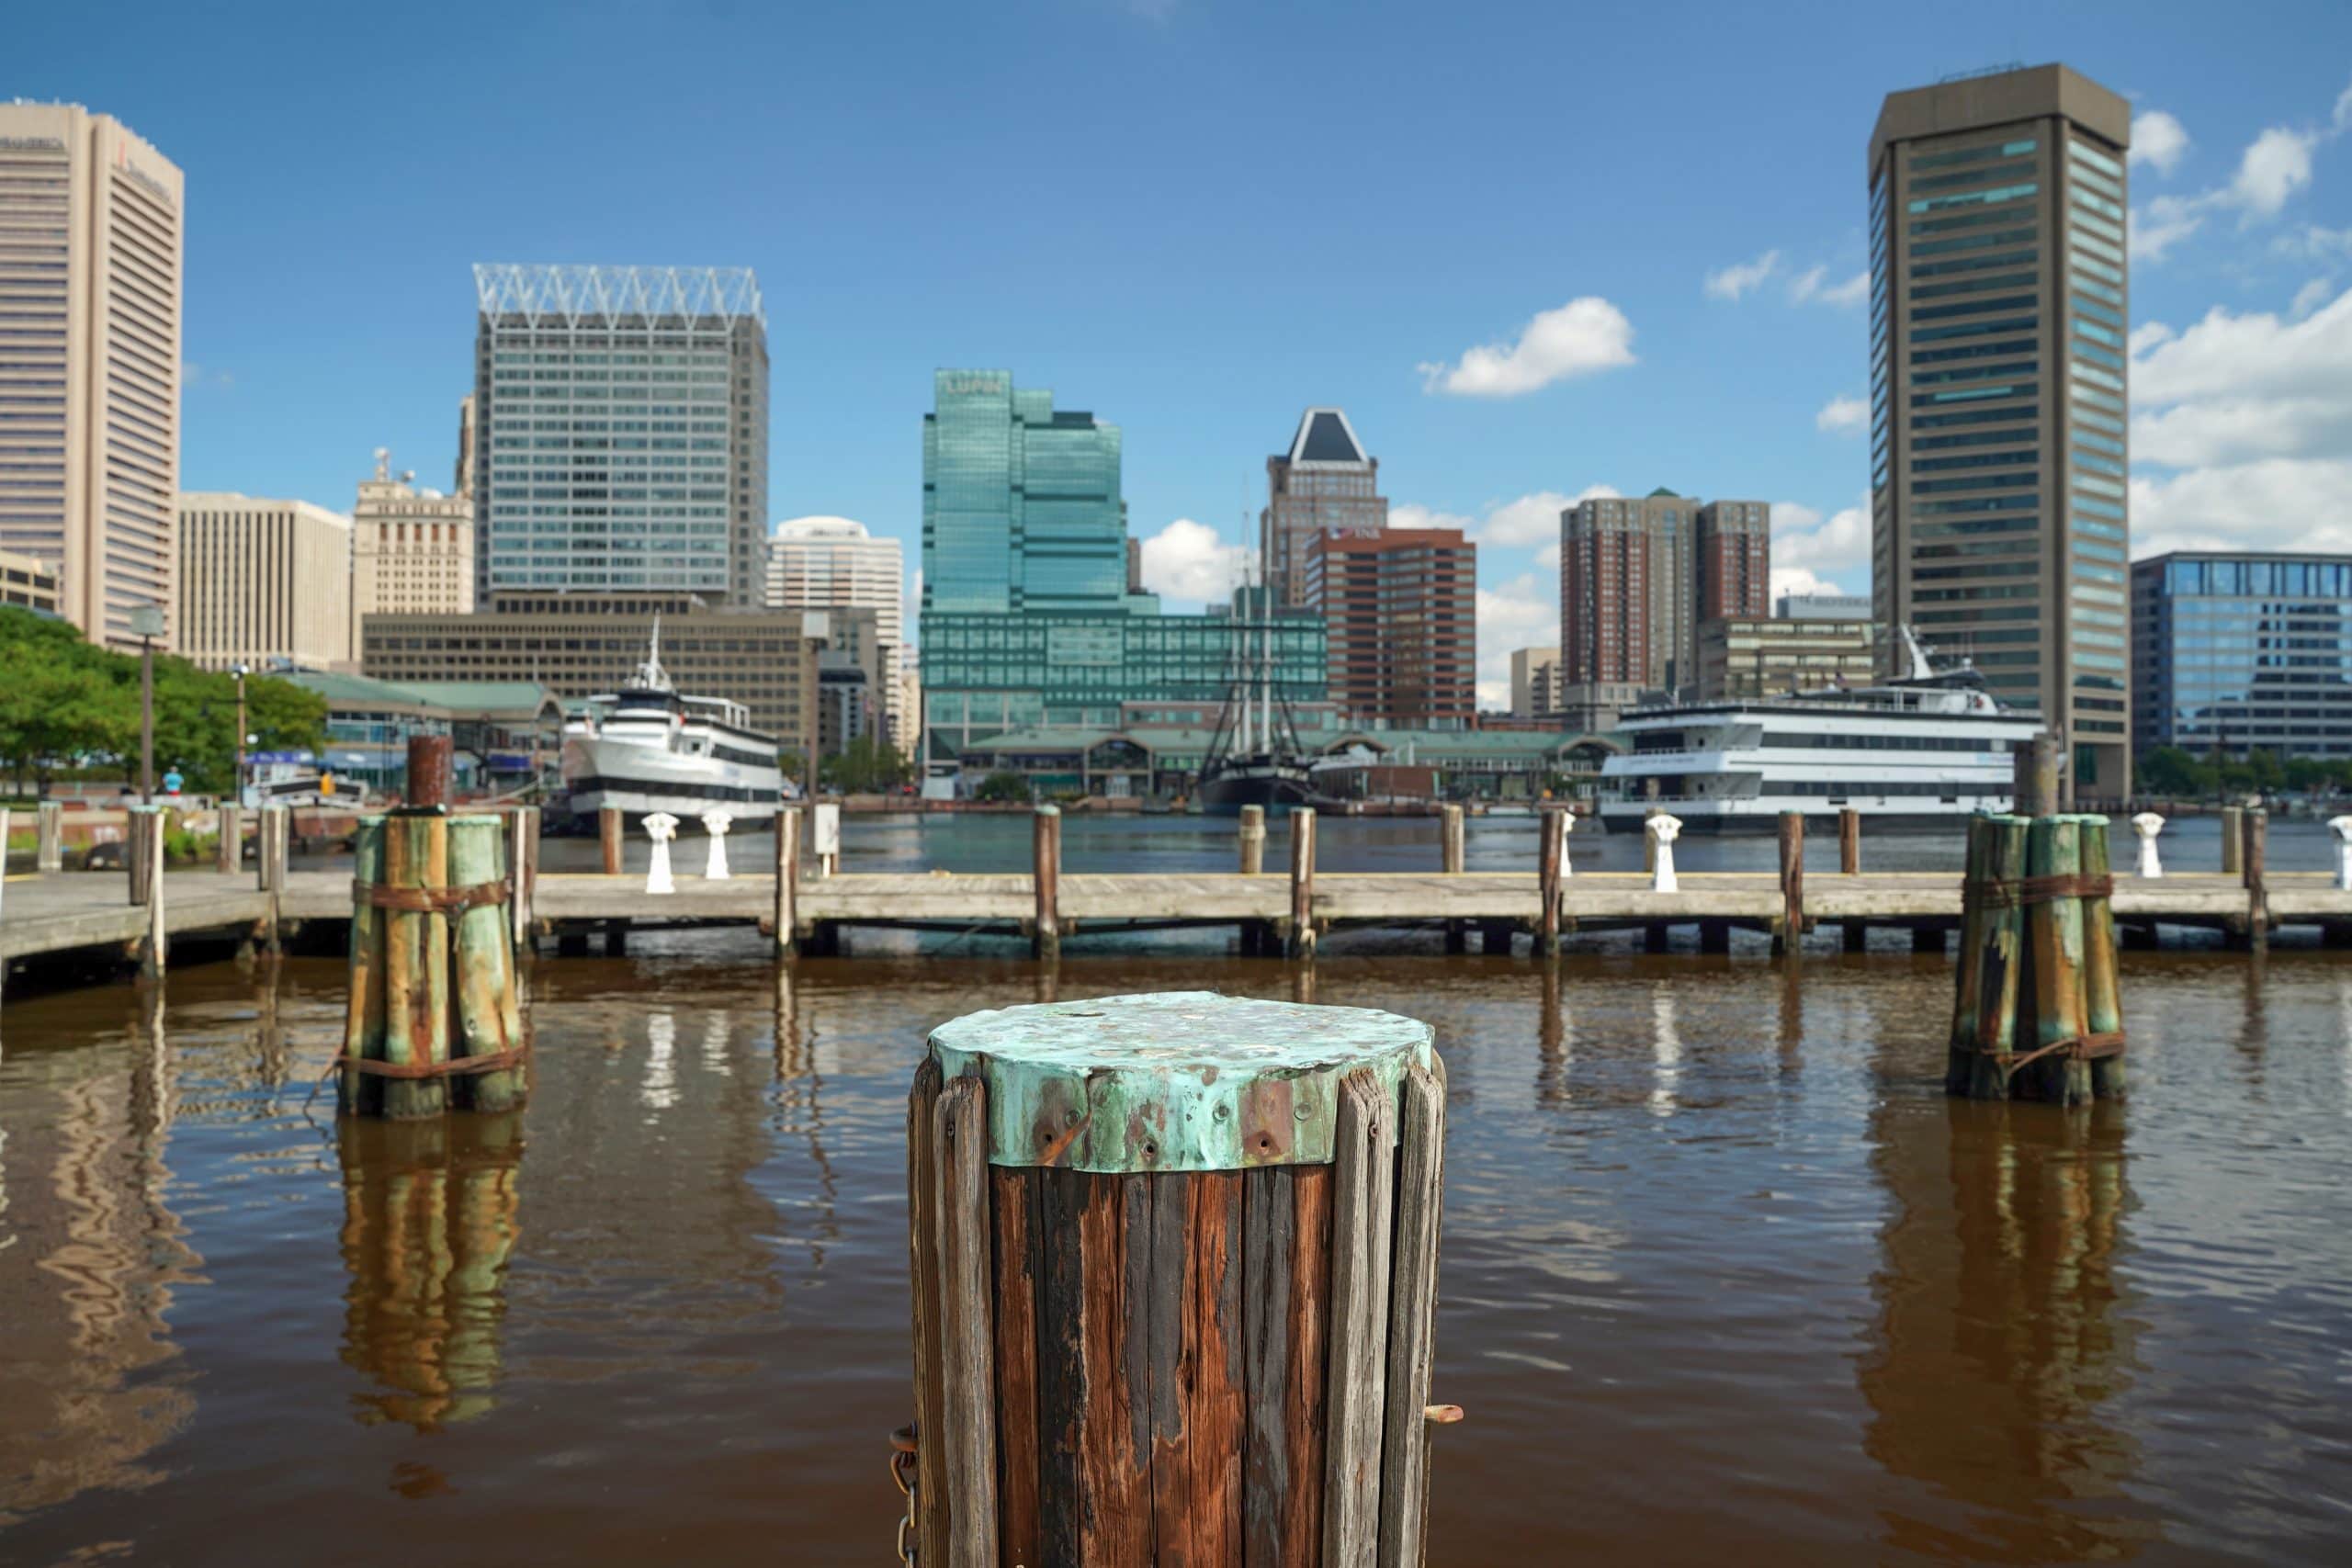 Maryland harbor with commercial building skyline